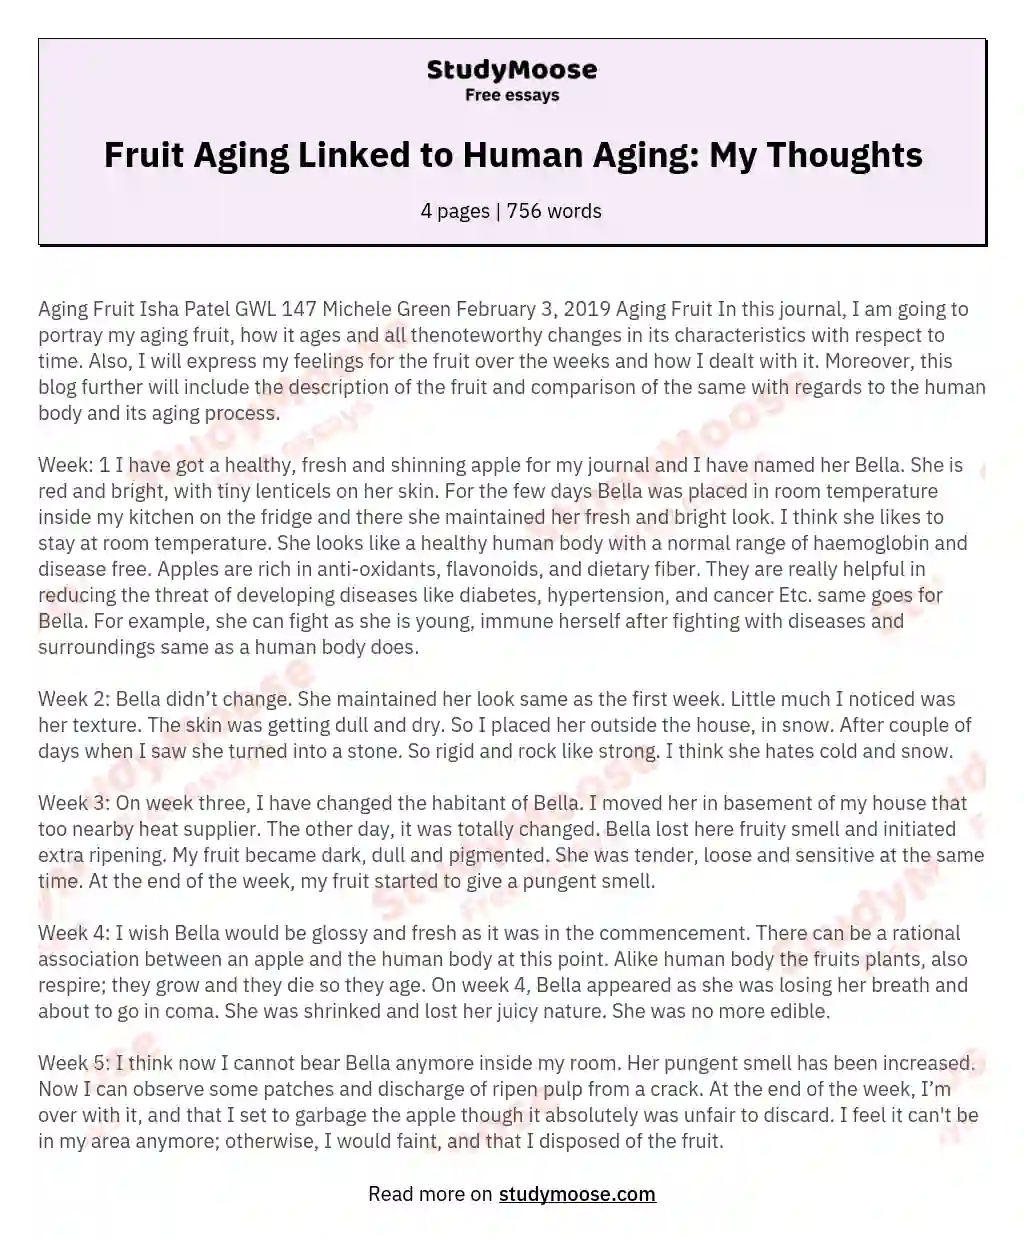 Fruit Aging Linked to Human Aging: My Thoughts essay